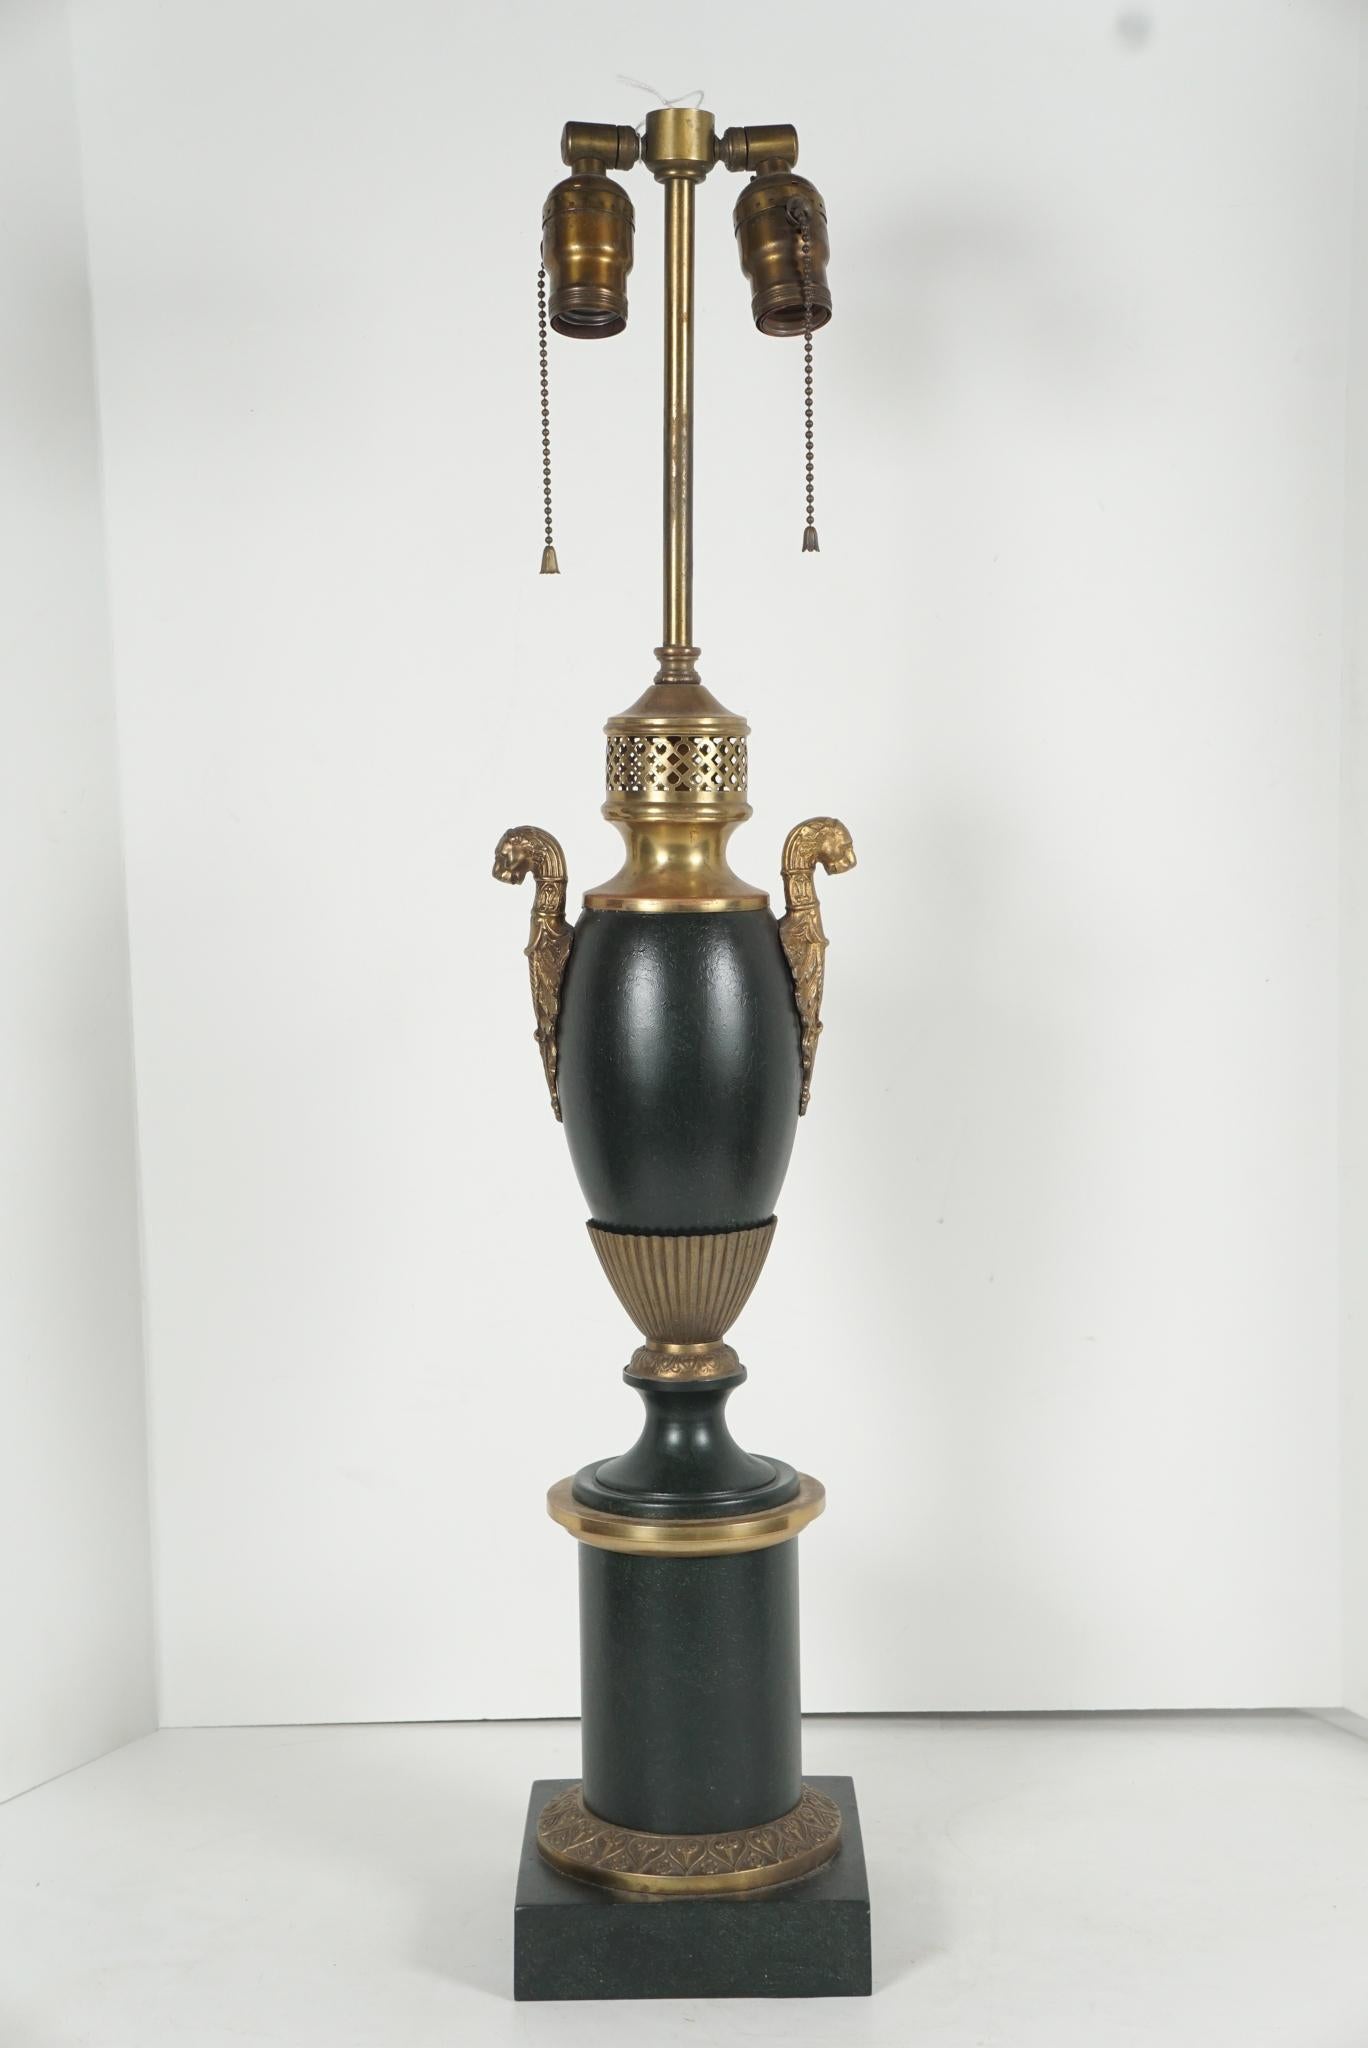 This fine old lamp made of tin, gilded brass and cast bronze would have had a burner at one point but now has been converted to electricity It comes from the estate of Paul and Bunny Mellon and once formed part of the decorative elements in their